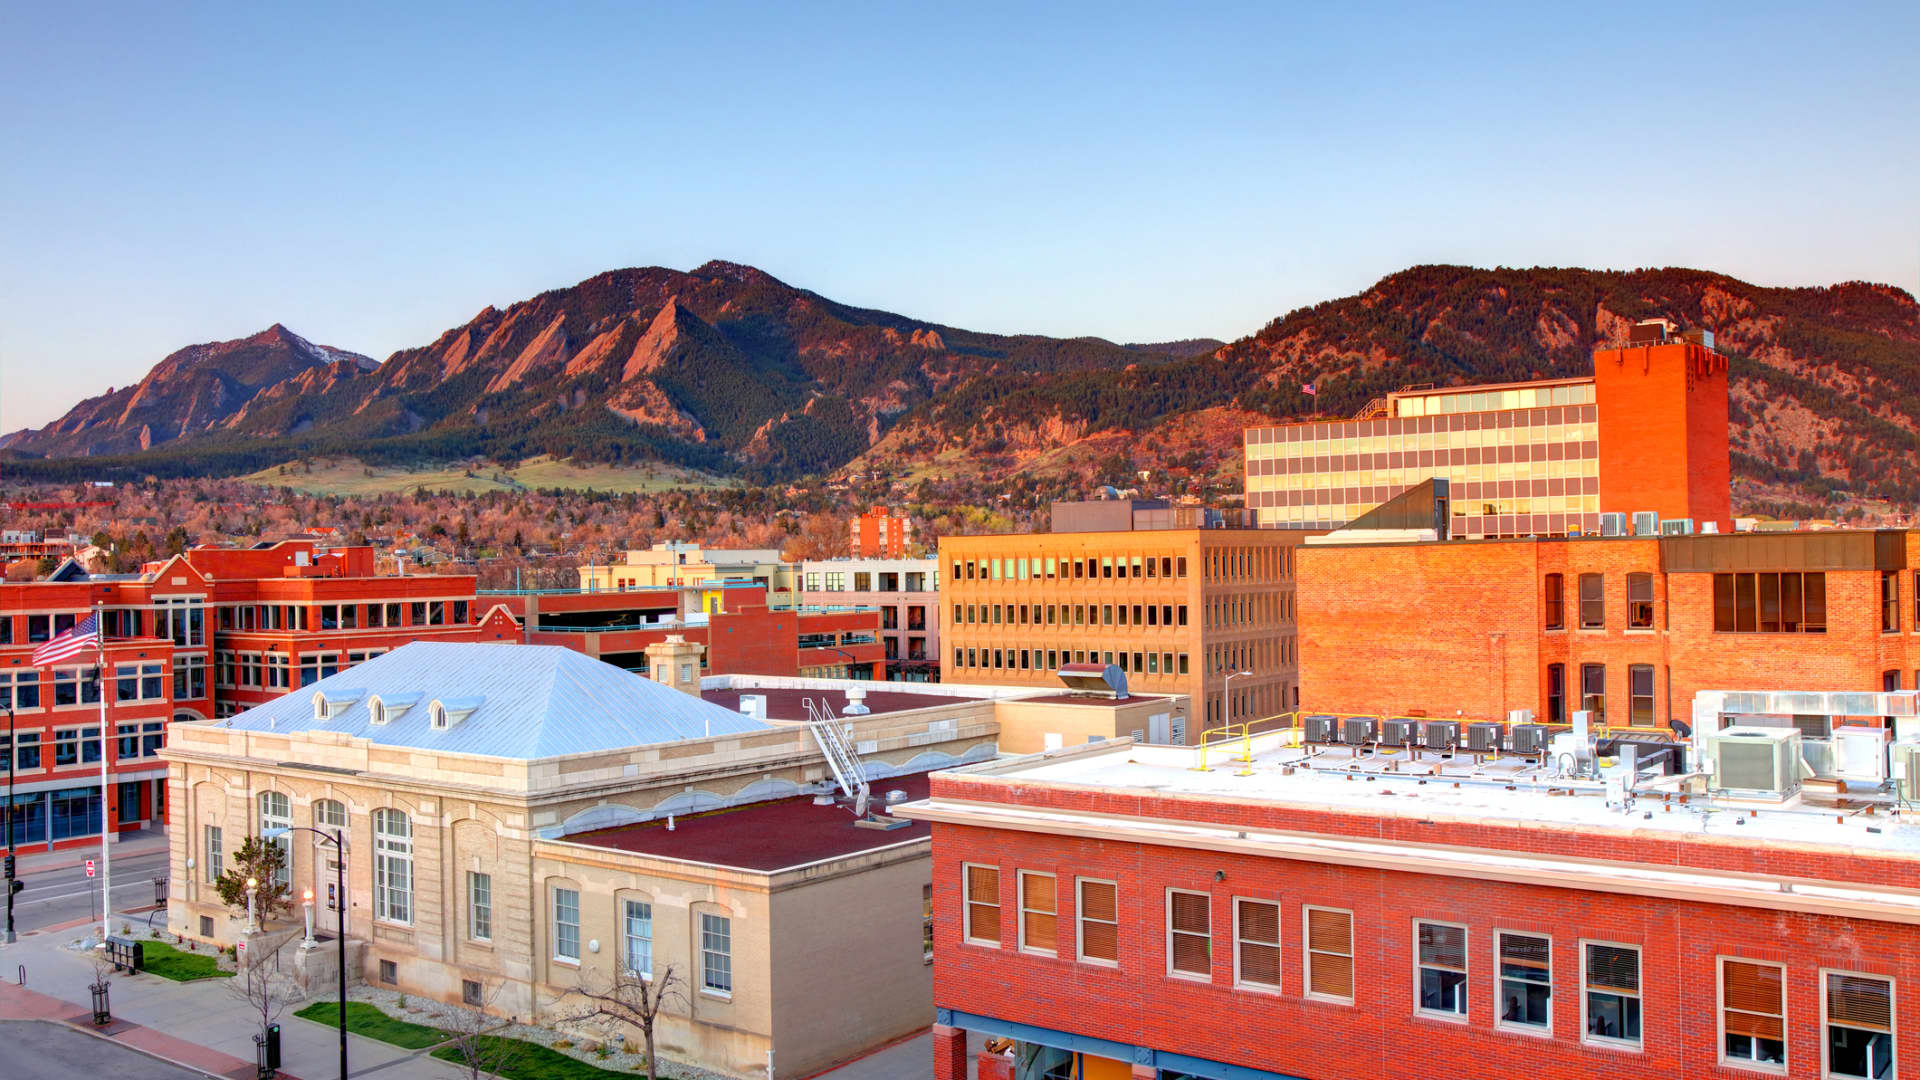 Boulder is the No. 2 U.S. city for quality of life, according to U.S. News and World Report.